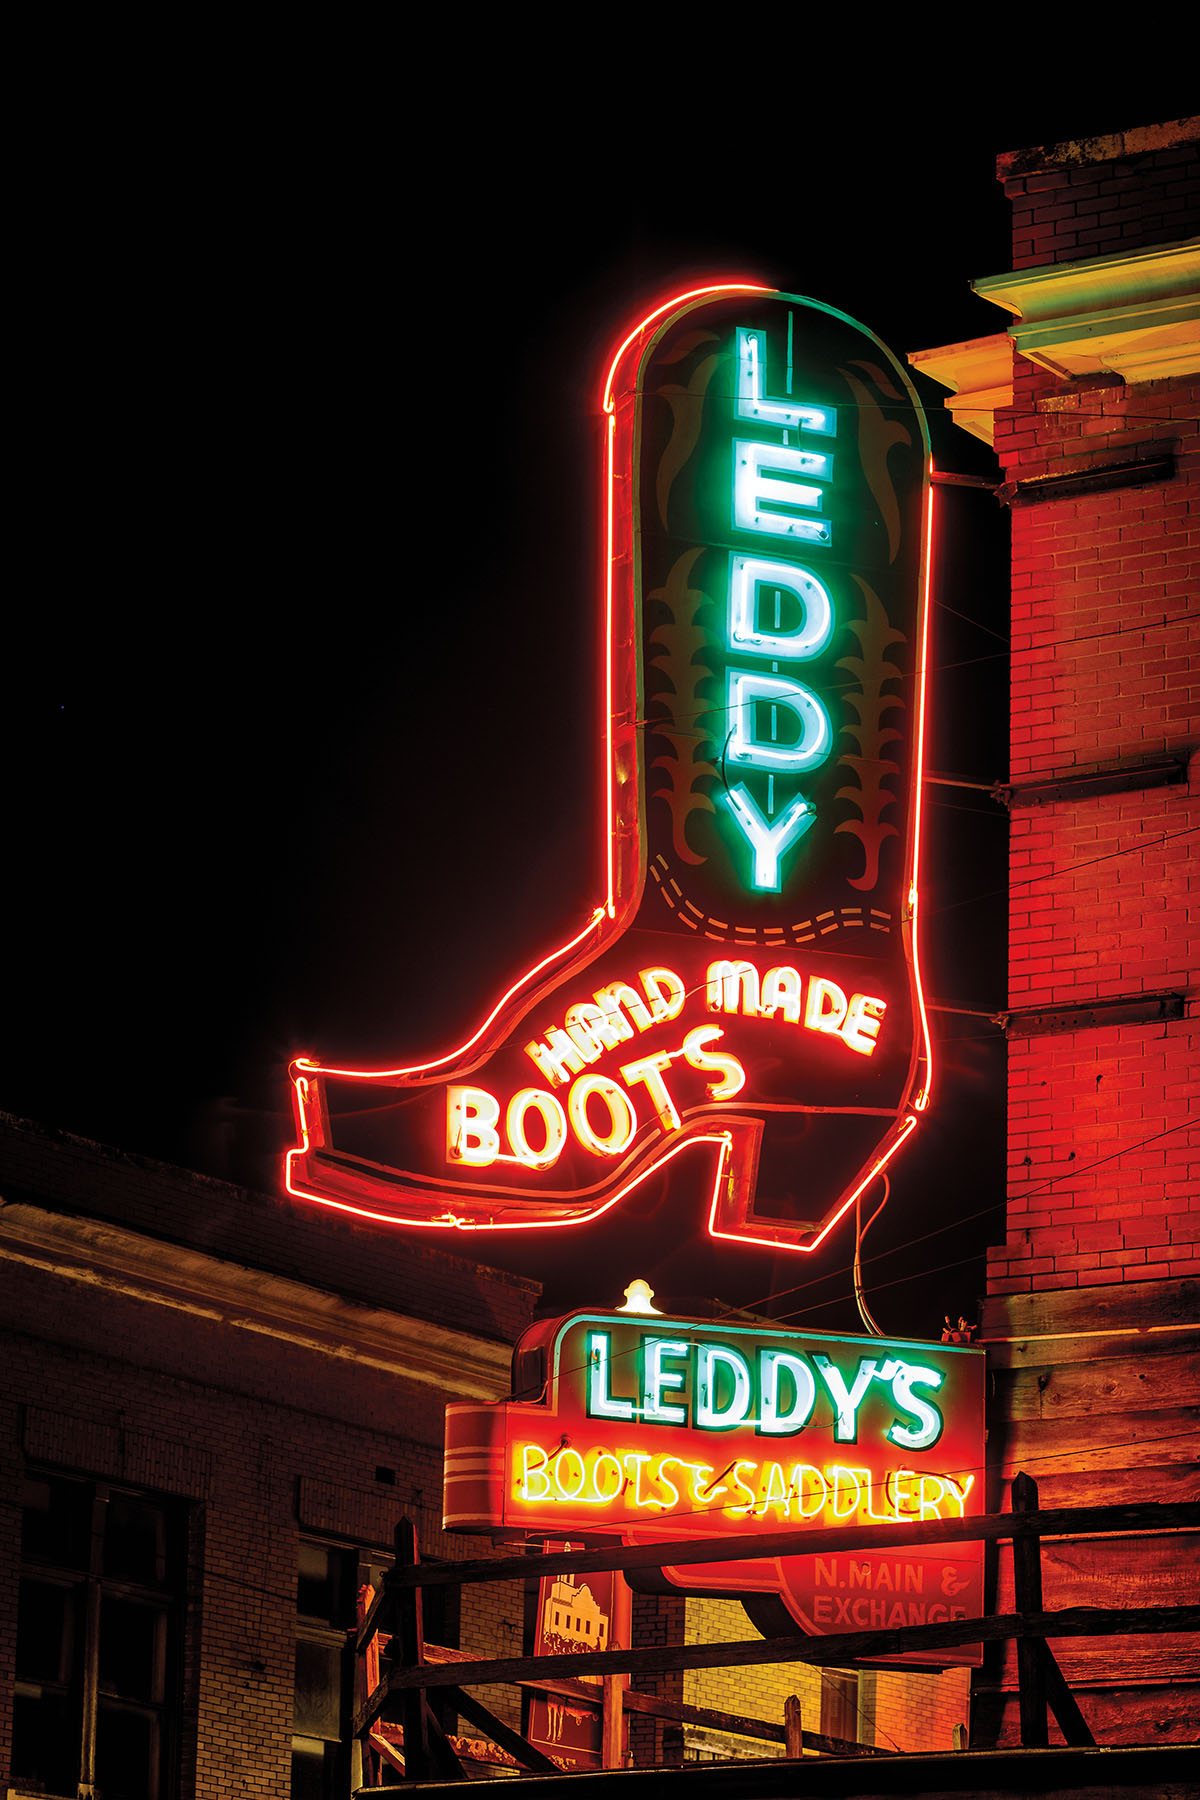 A green and red glowing neon sign reading "Leddy Hand-Made Boots"